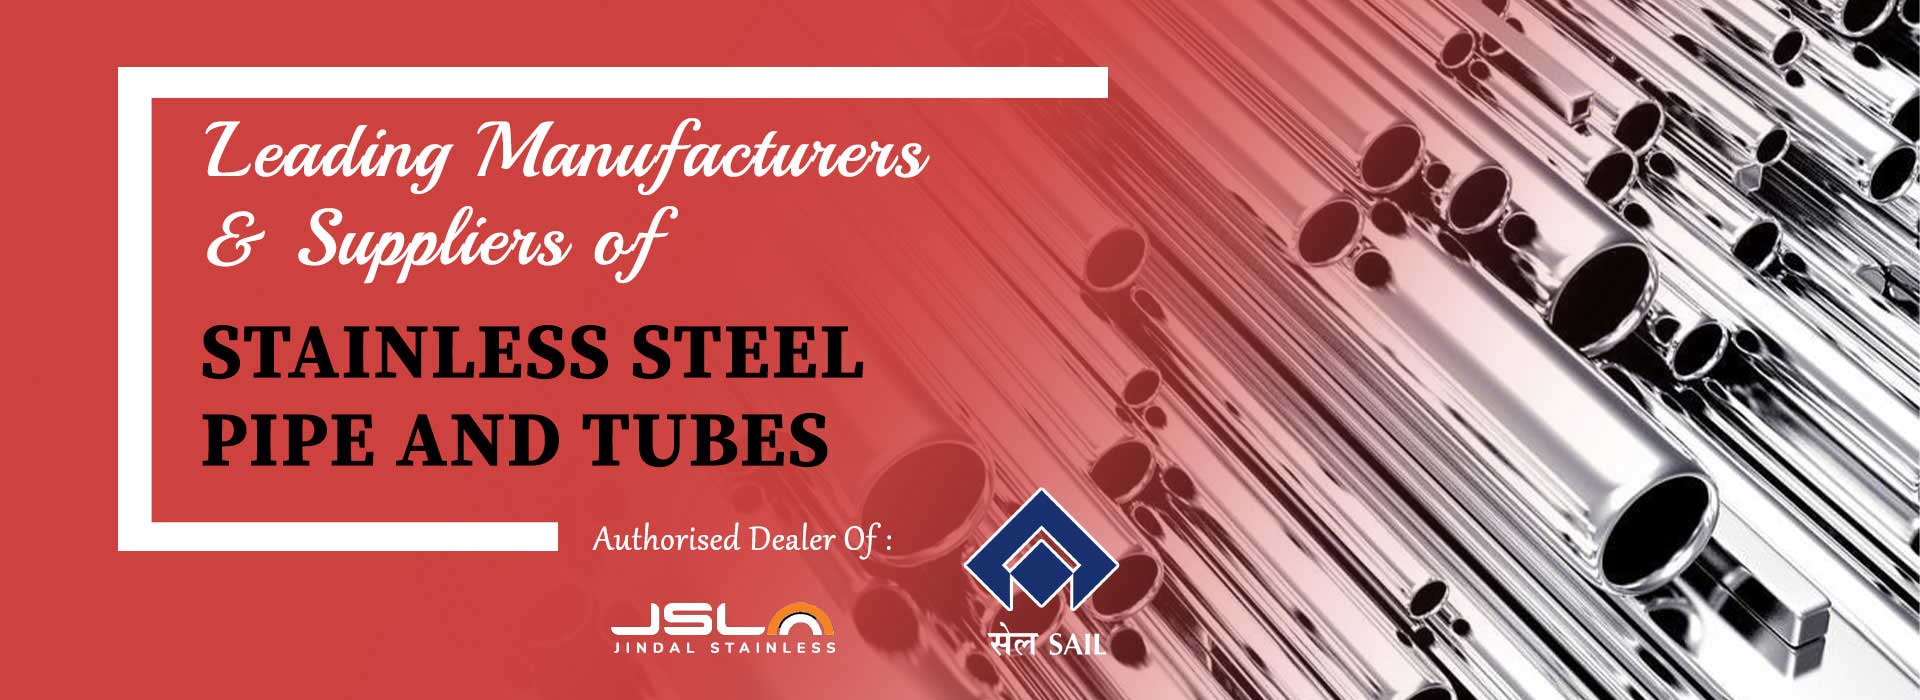 Stainless Steel Pipe and Tubes Manufacturers in Uttarakhand